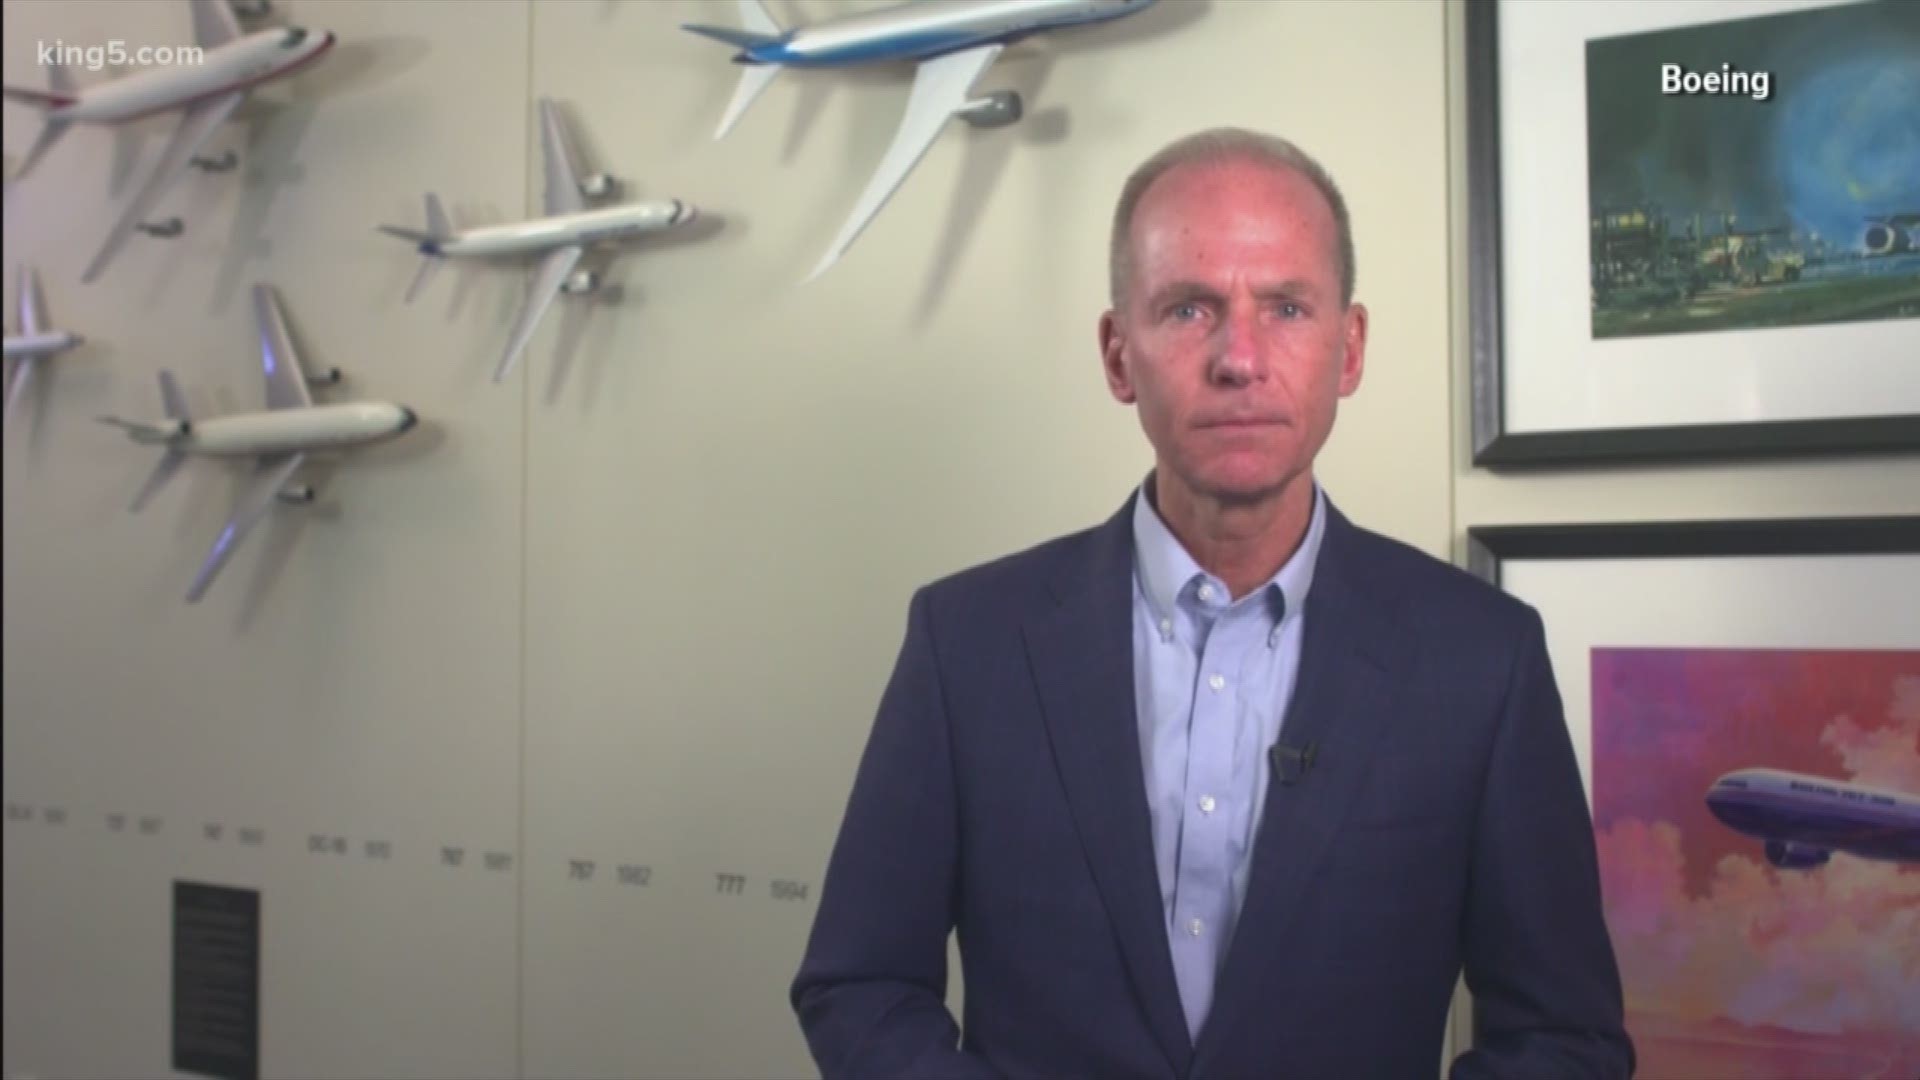 Boeing CEO Dennis Muilenburg shares open message after deadly 737 MAX crashes. See the full video and letter on king5.com